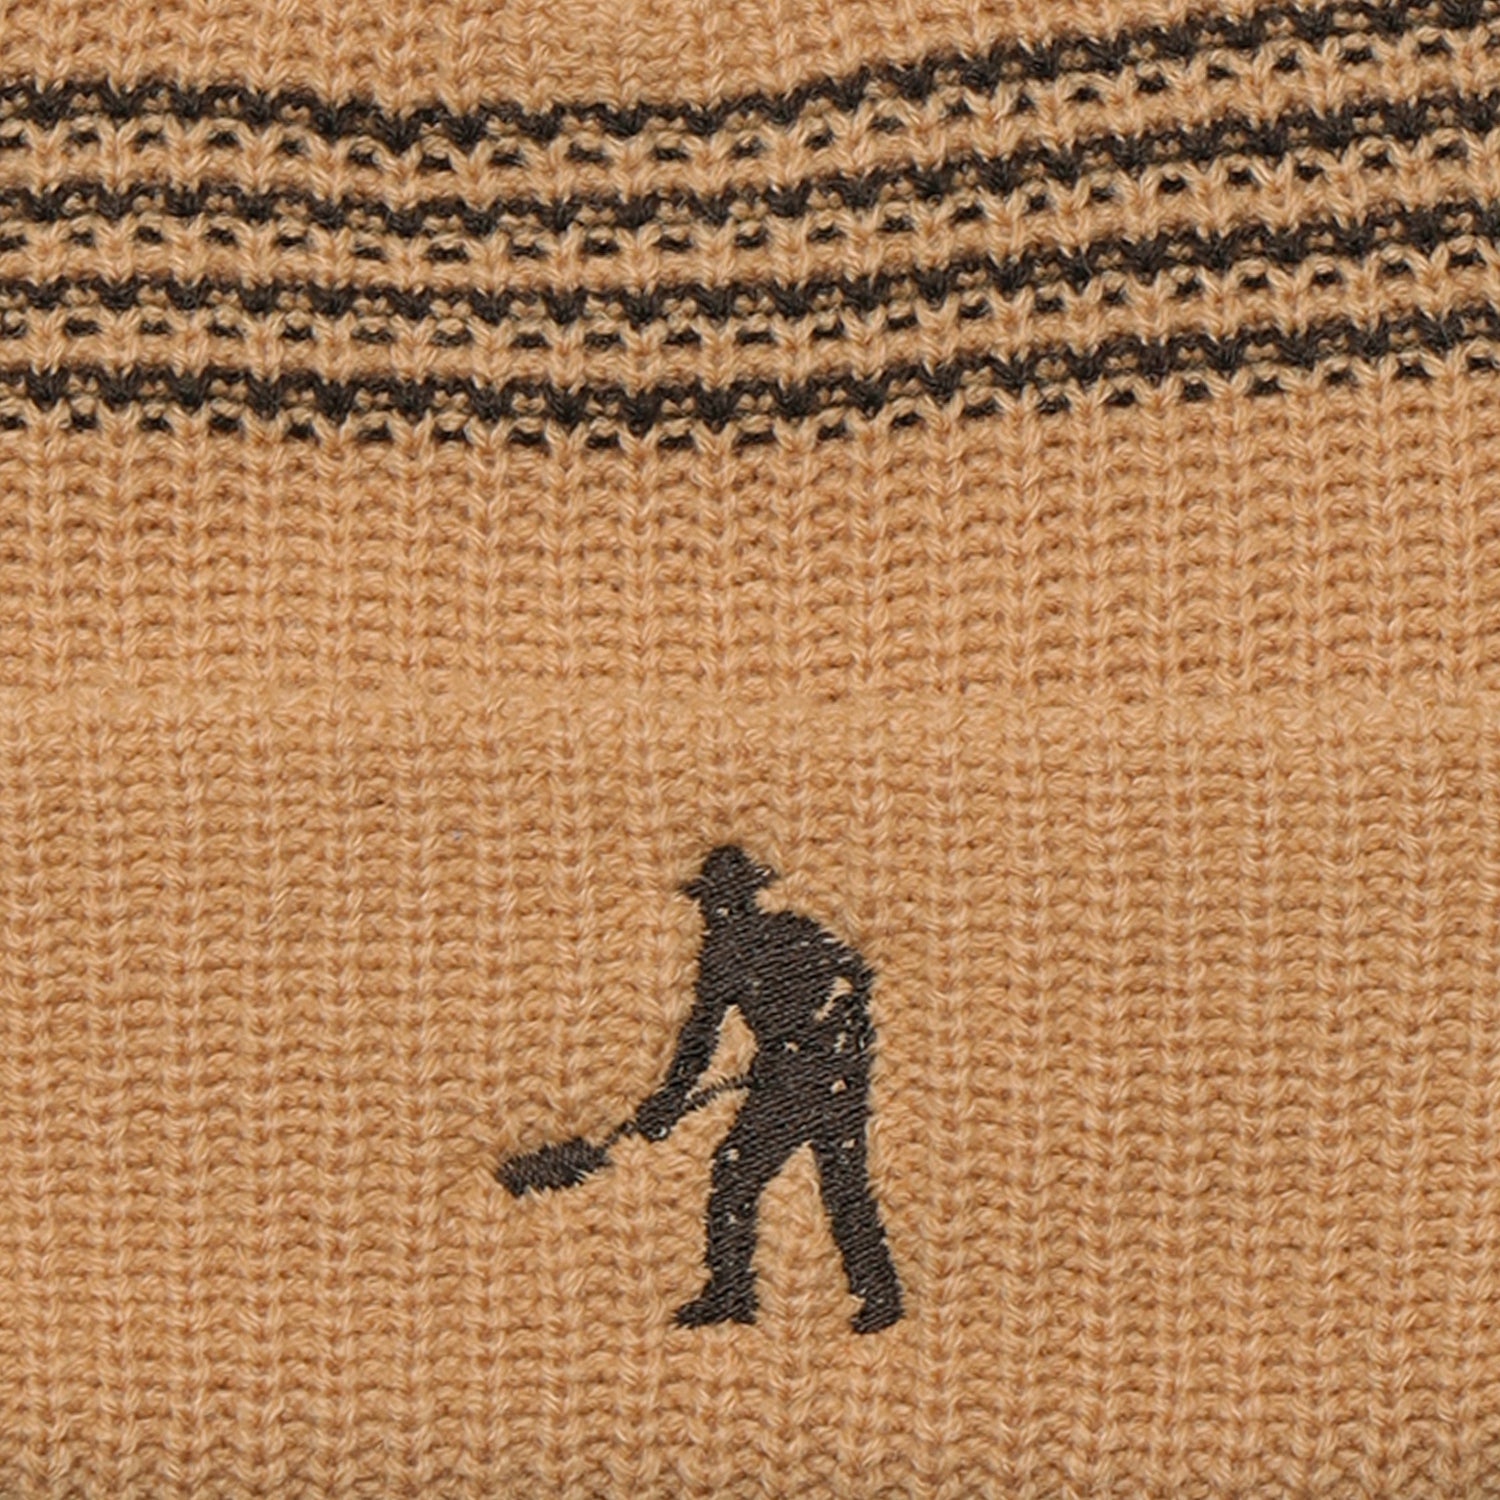 Pass~Port Digger Striped Knit Beanie - Sand / Chocolate